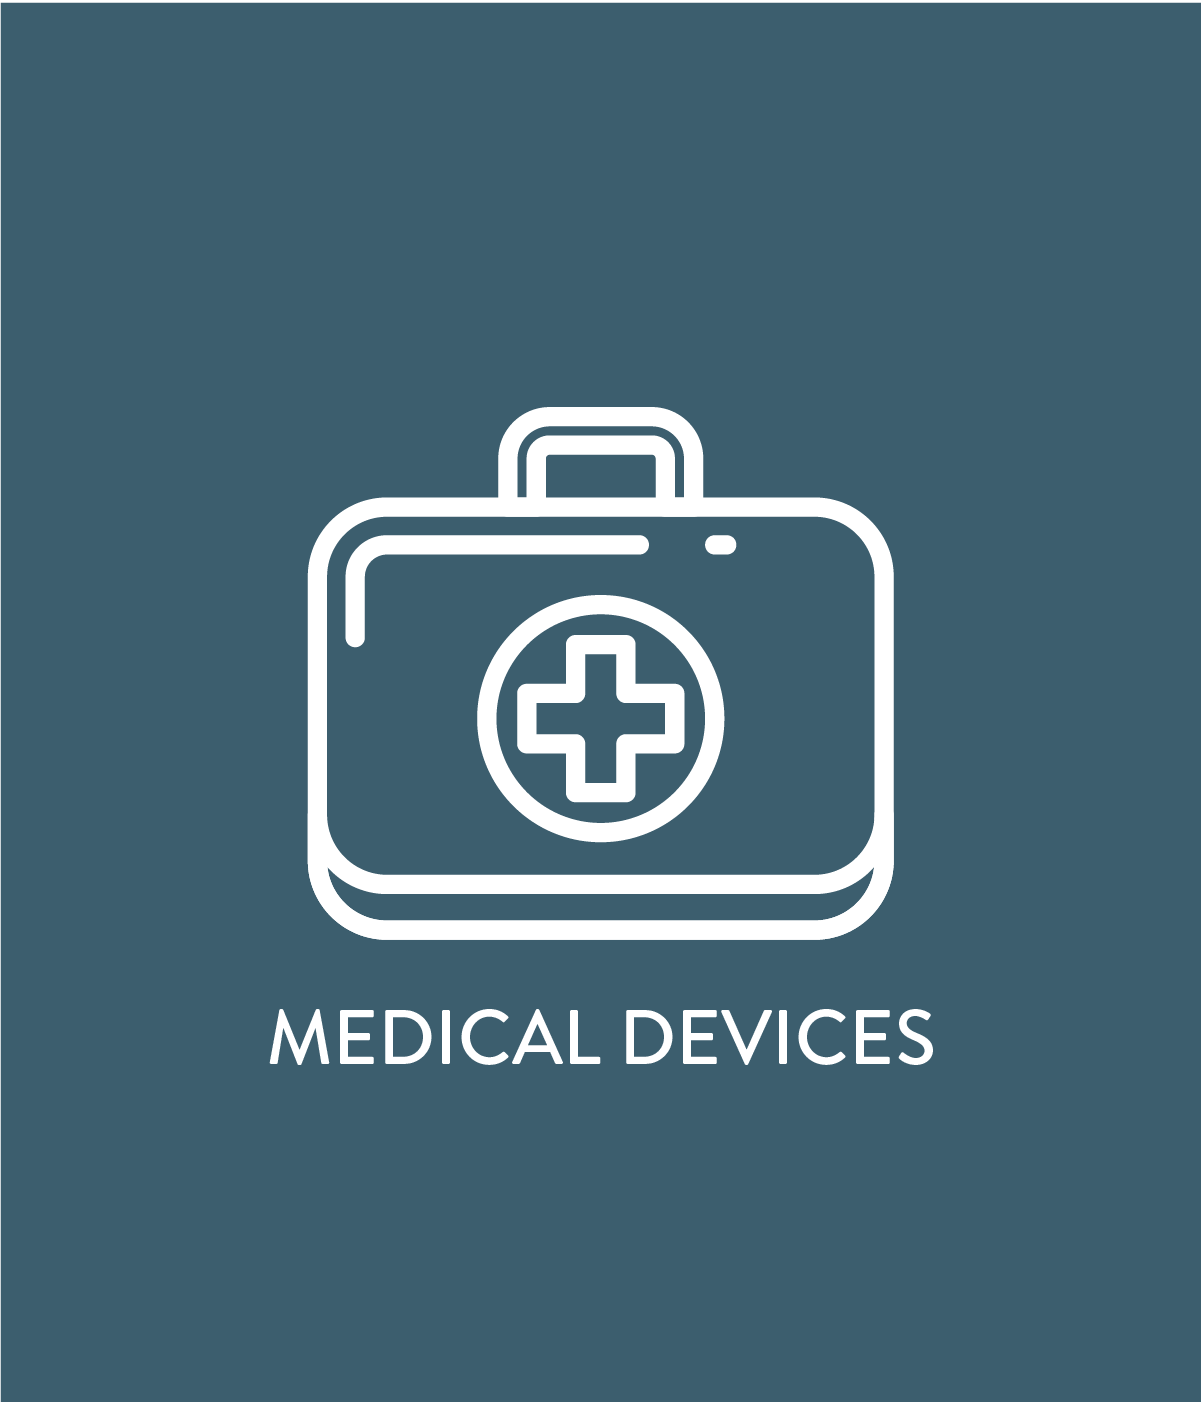 MEDICAL DEVICES